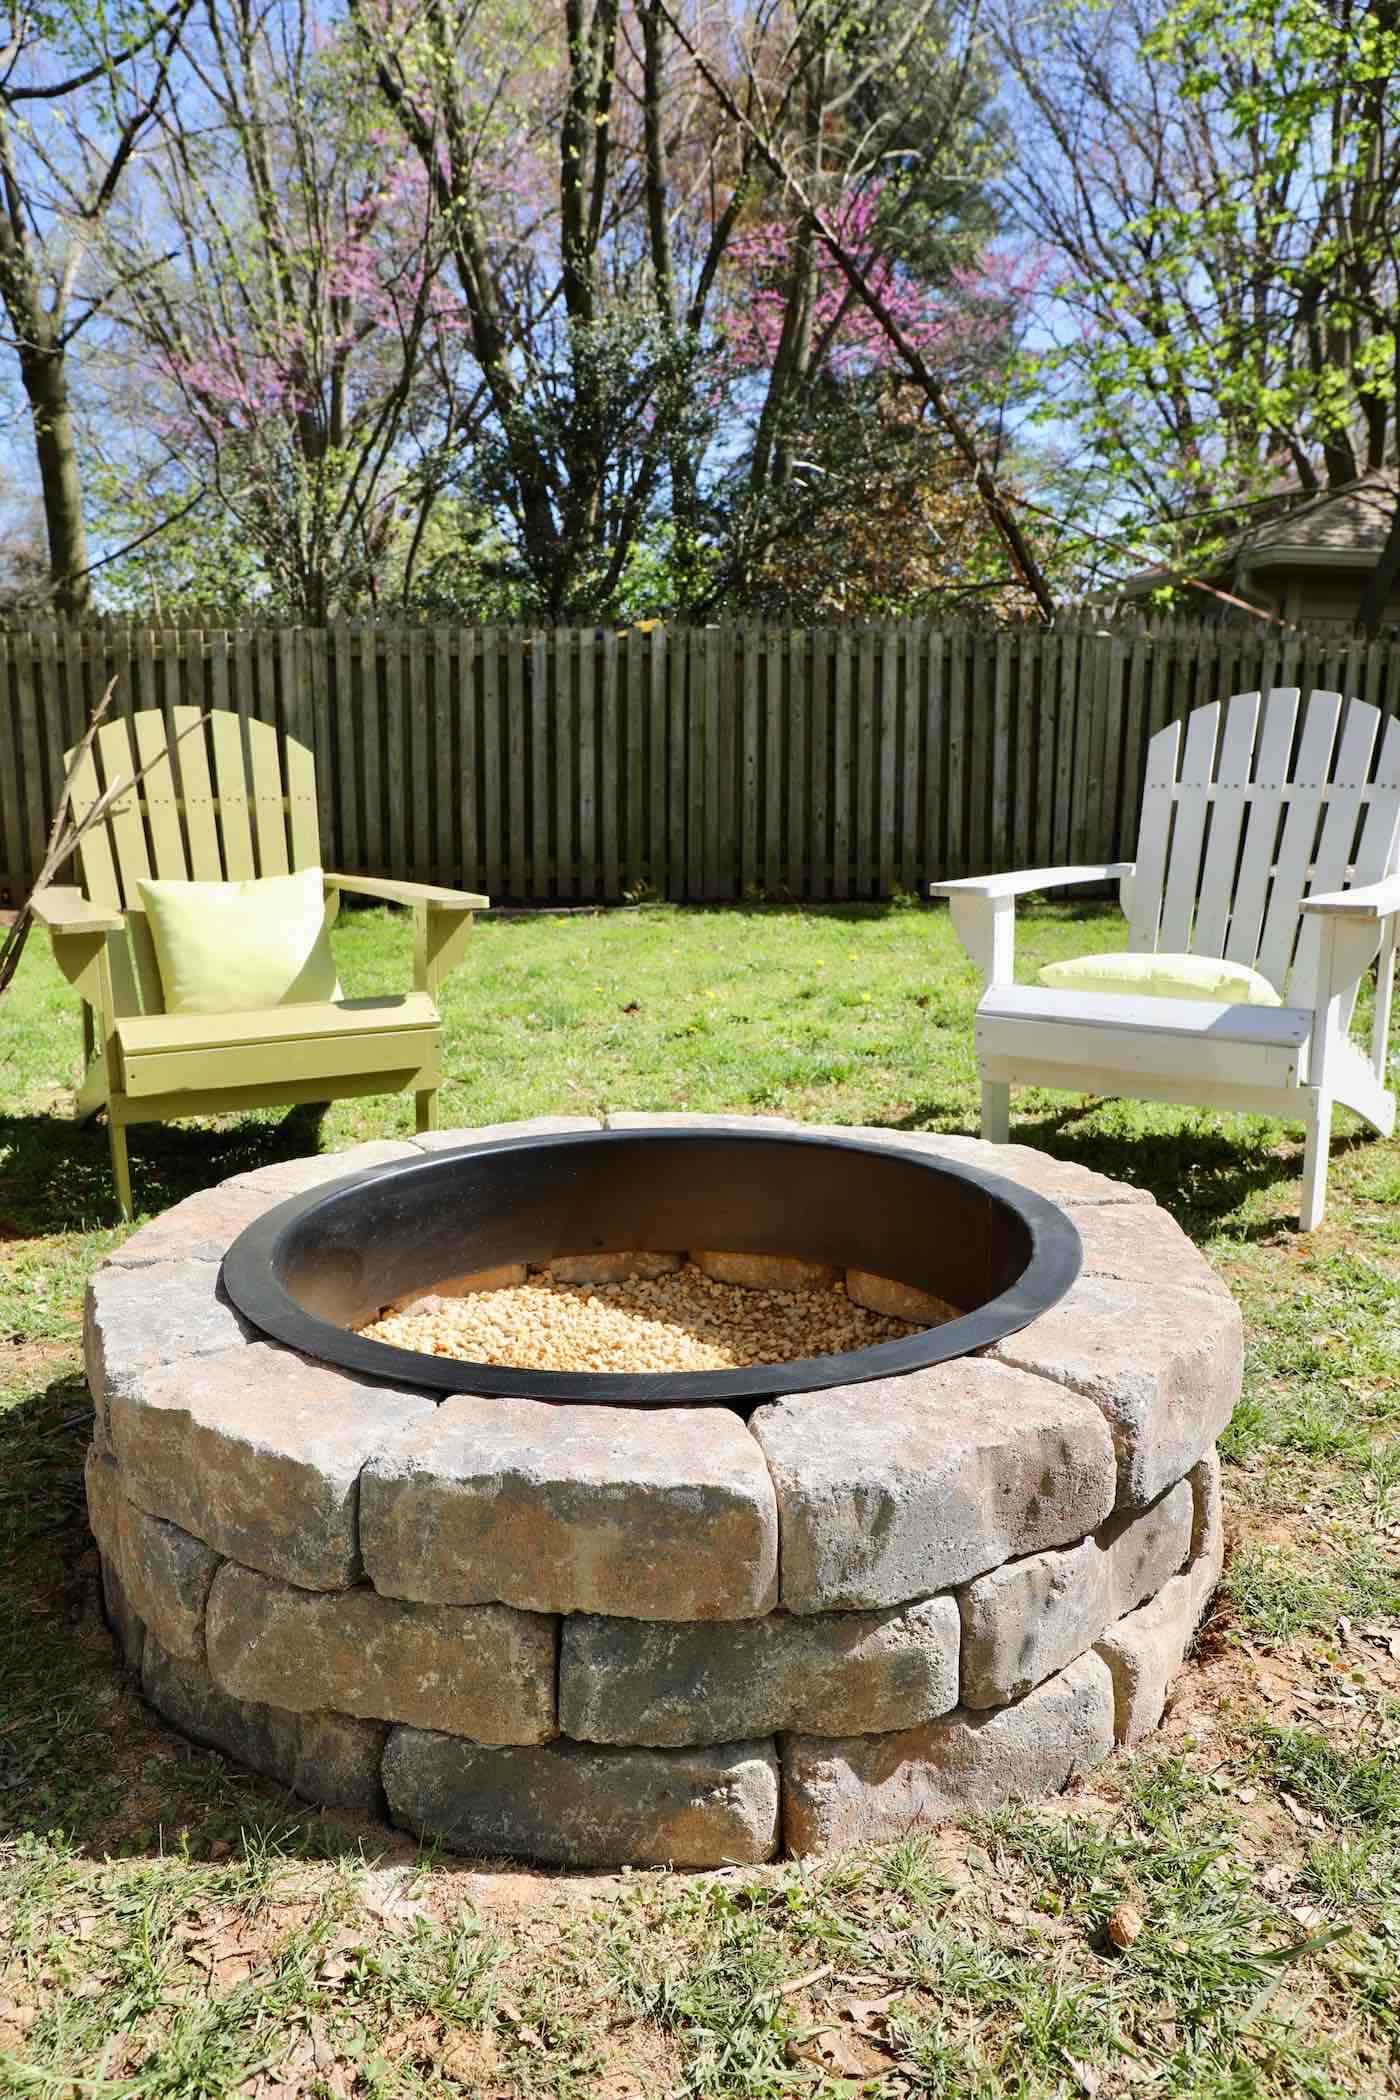 Diy Fire Pit With Gravel Stones, How To Build Your Own Fire Pit